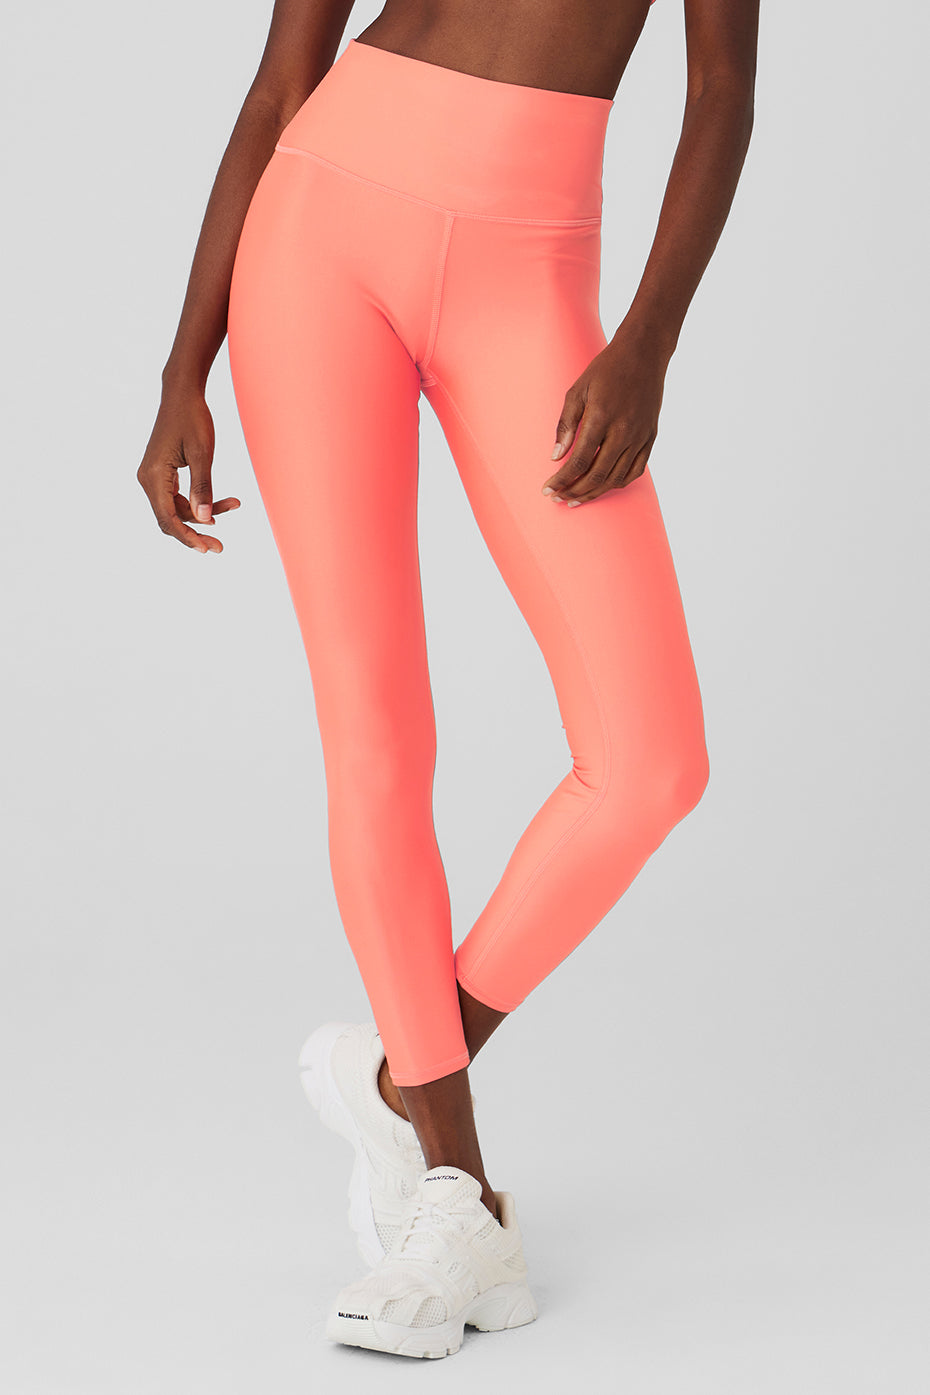 Alo Yoga Goddess Legging Pink Size M - $30 (68% Off Retail) - From